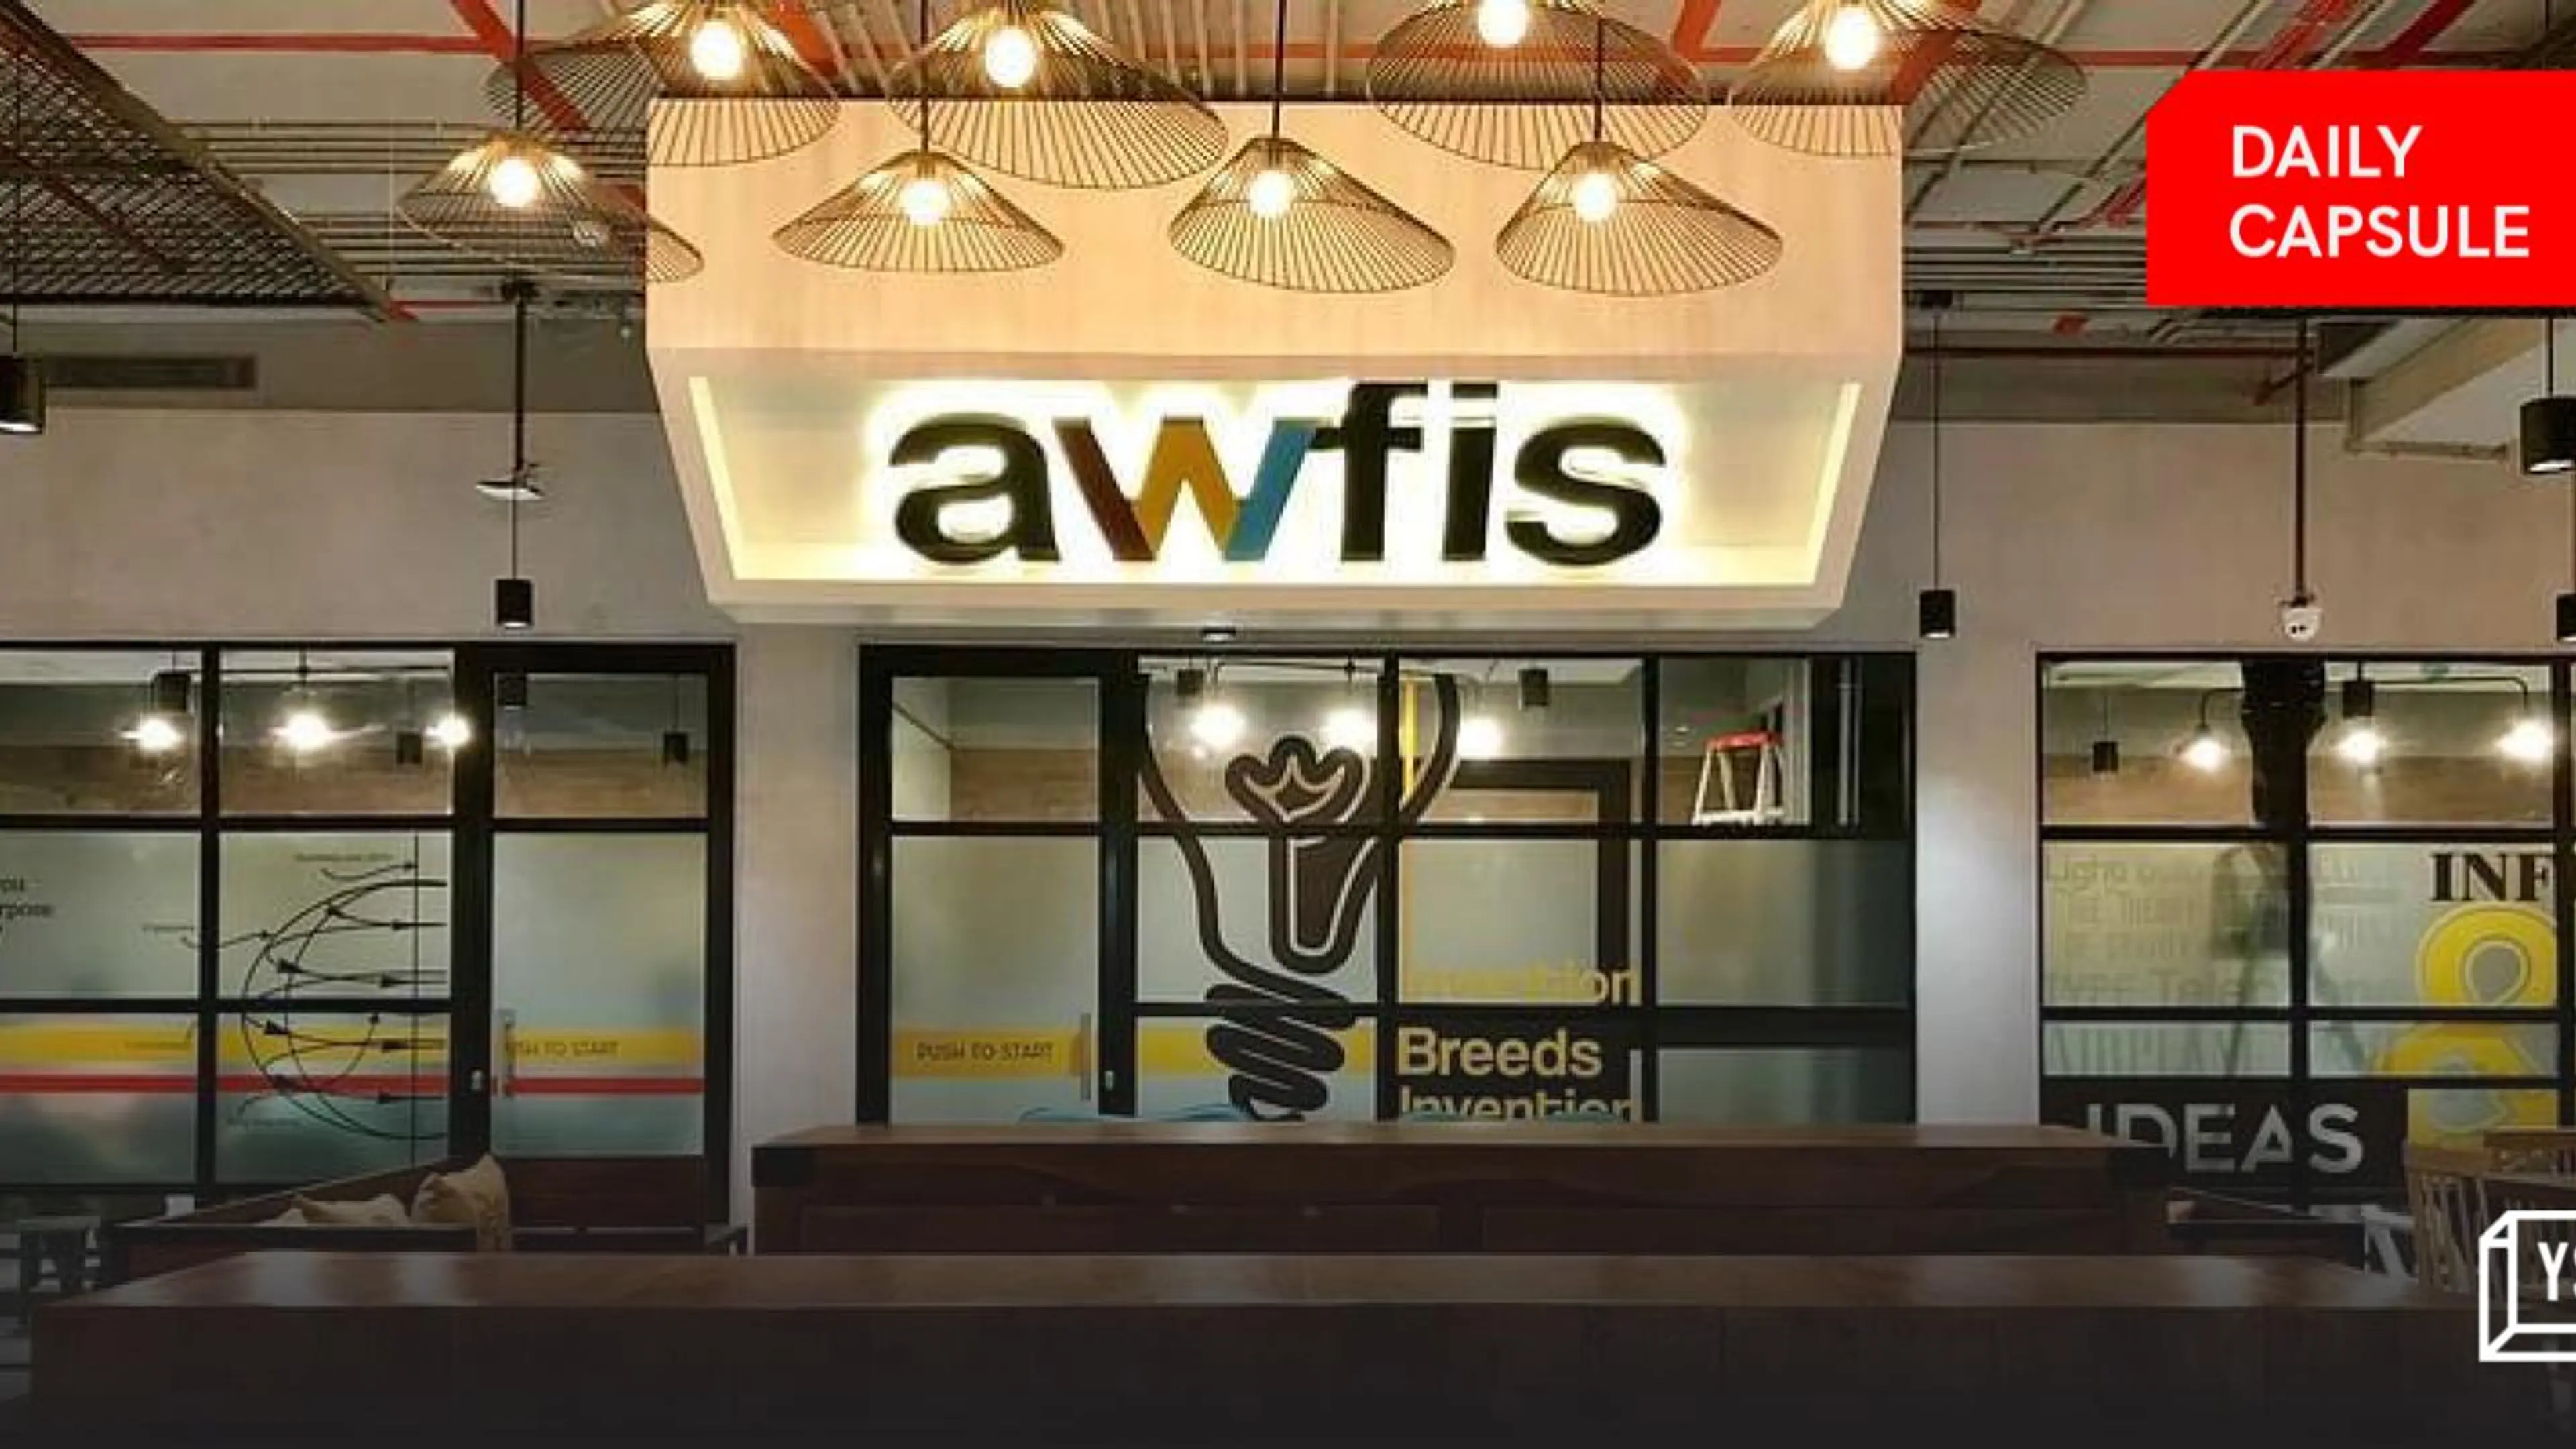 Awfis IPO gets huge investor interest; Breaking into movies at 71